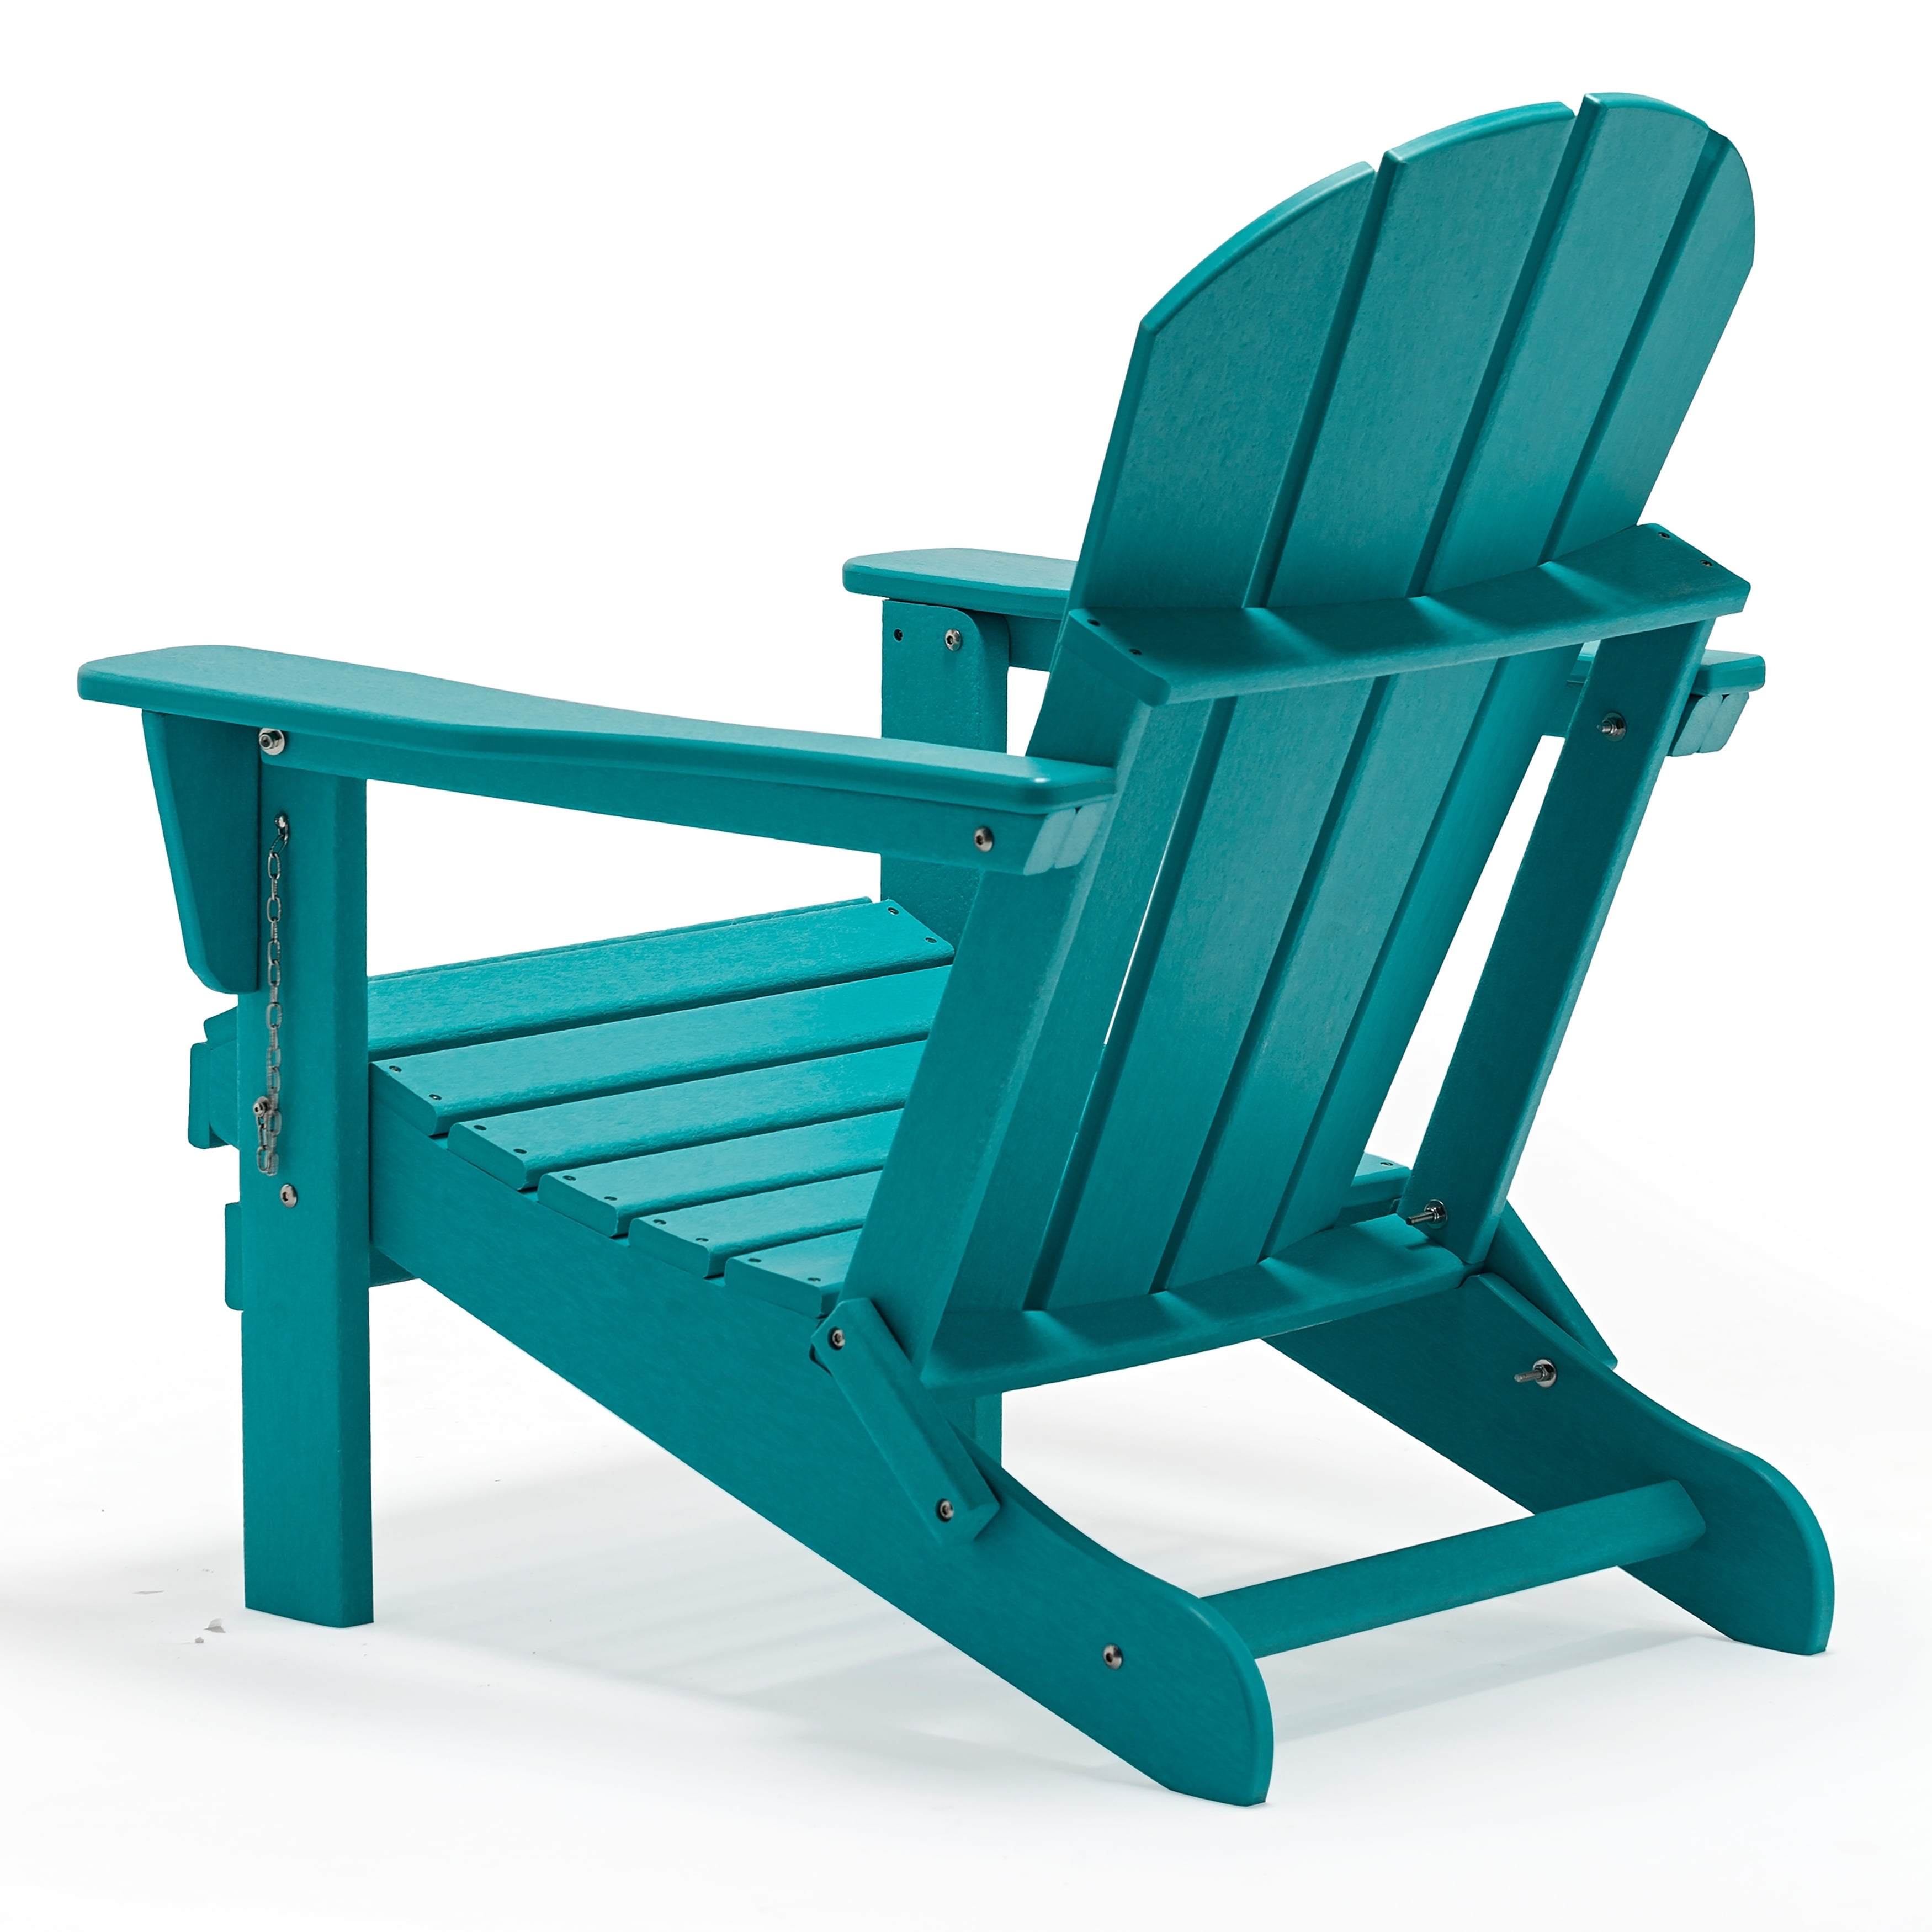 Are These The Best Plastic Adirondack Chairs For Big & Tall People. Find Out Here